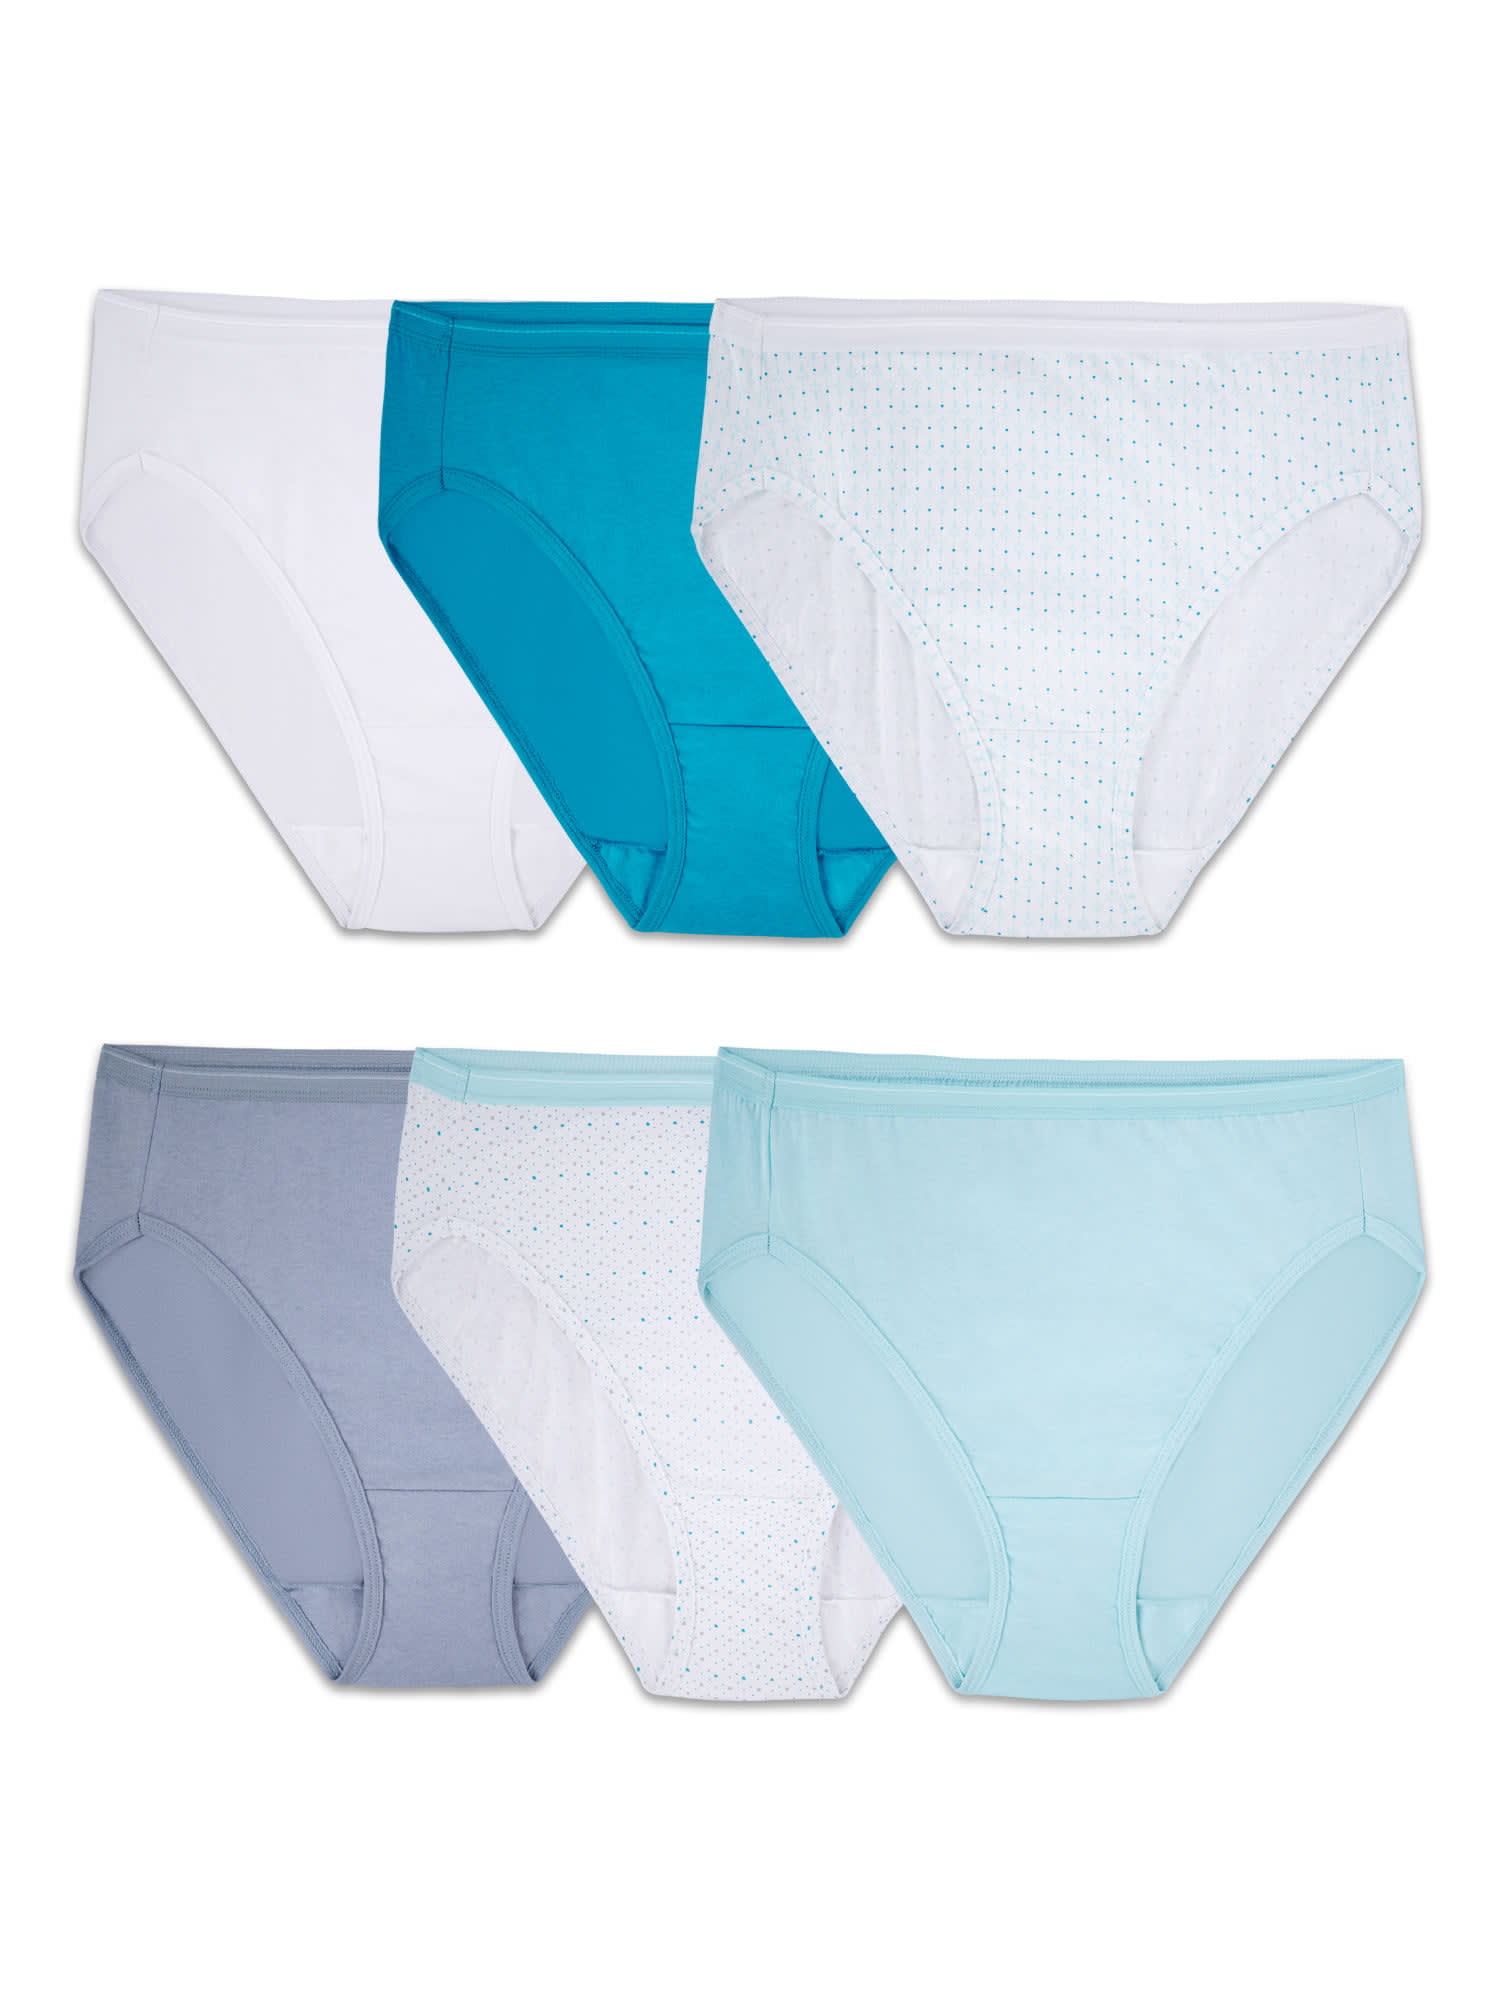 Fruit of the Loom Women's Hi Cut Underwear, 6 Pack, Sizes S-3XL - DroneUp  Delivery